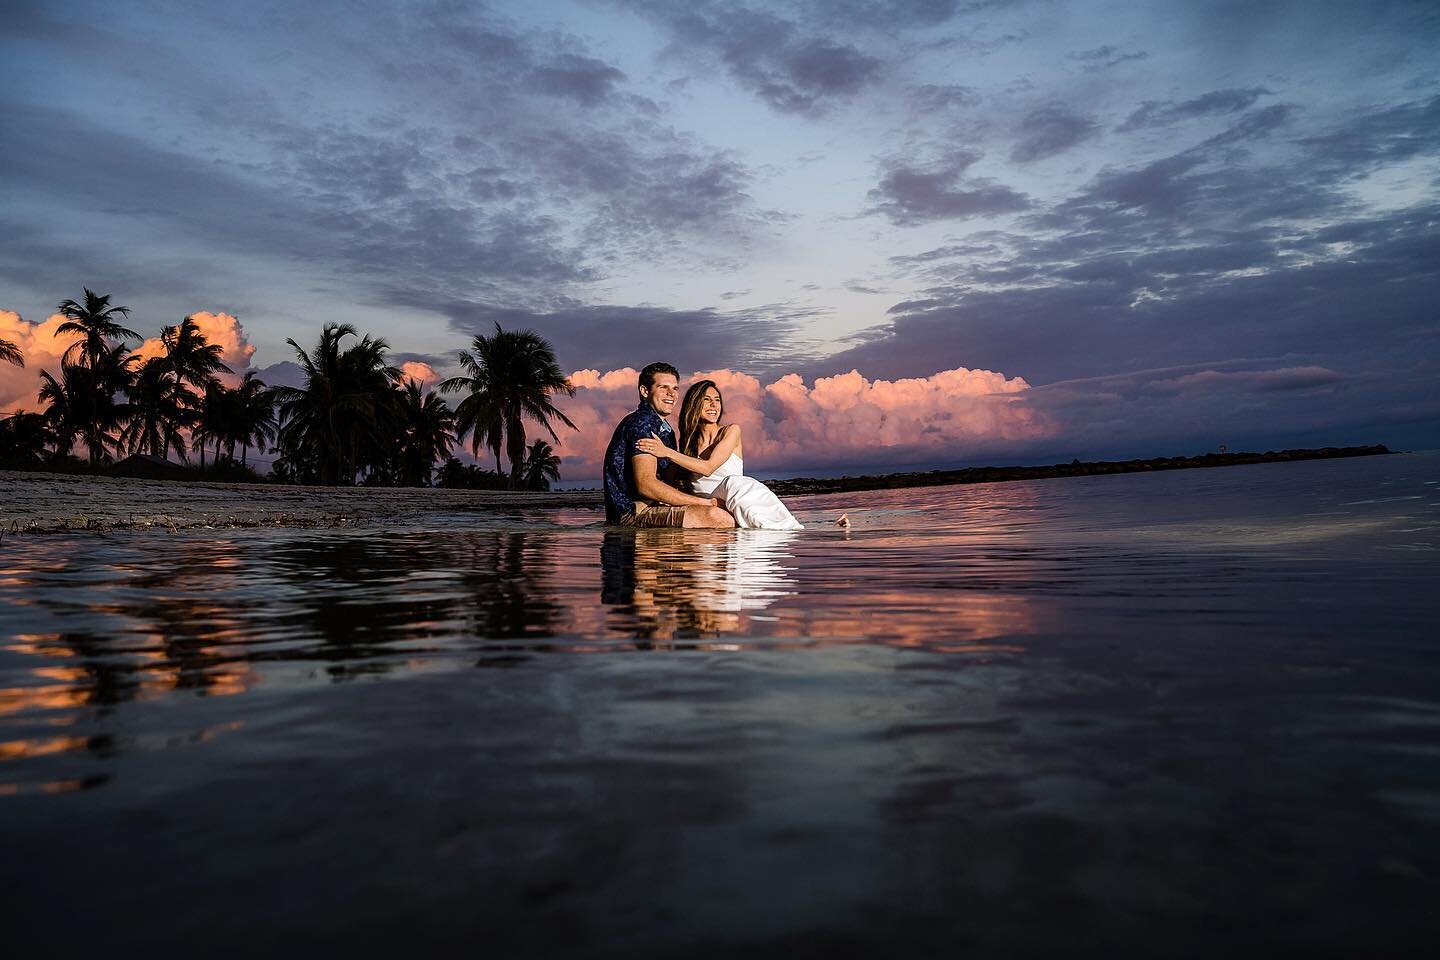 Soooo excited to share this amazing wedding on the blog today&hellip;but&hellip;. first I gotta share this beauty from our Around Key West Session! 💕💕 #wedding #sneakpeek #coupleshoot #love #beachlife #beachvibes #engaged #joeandmaria #joeandmariak